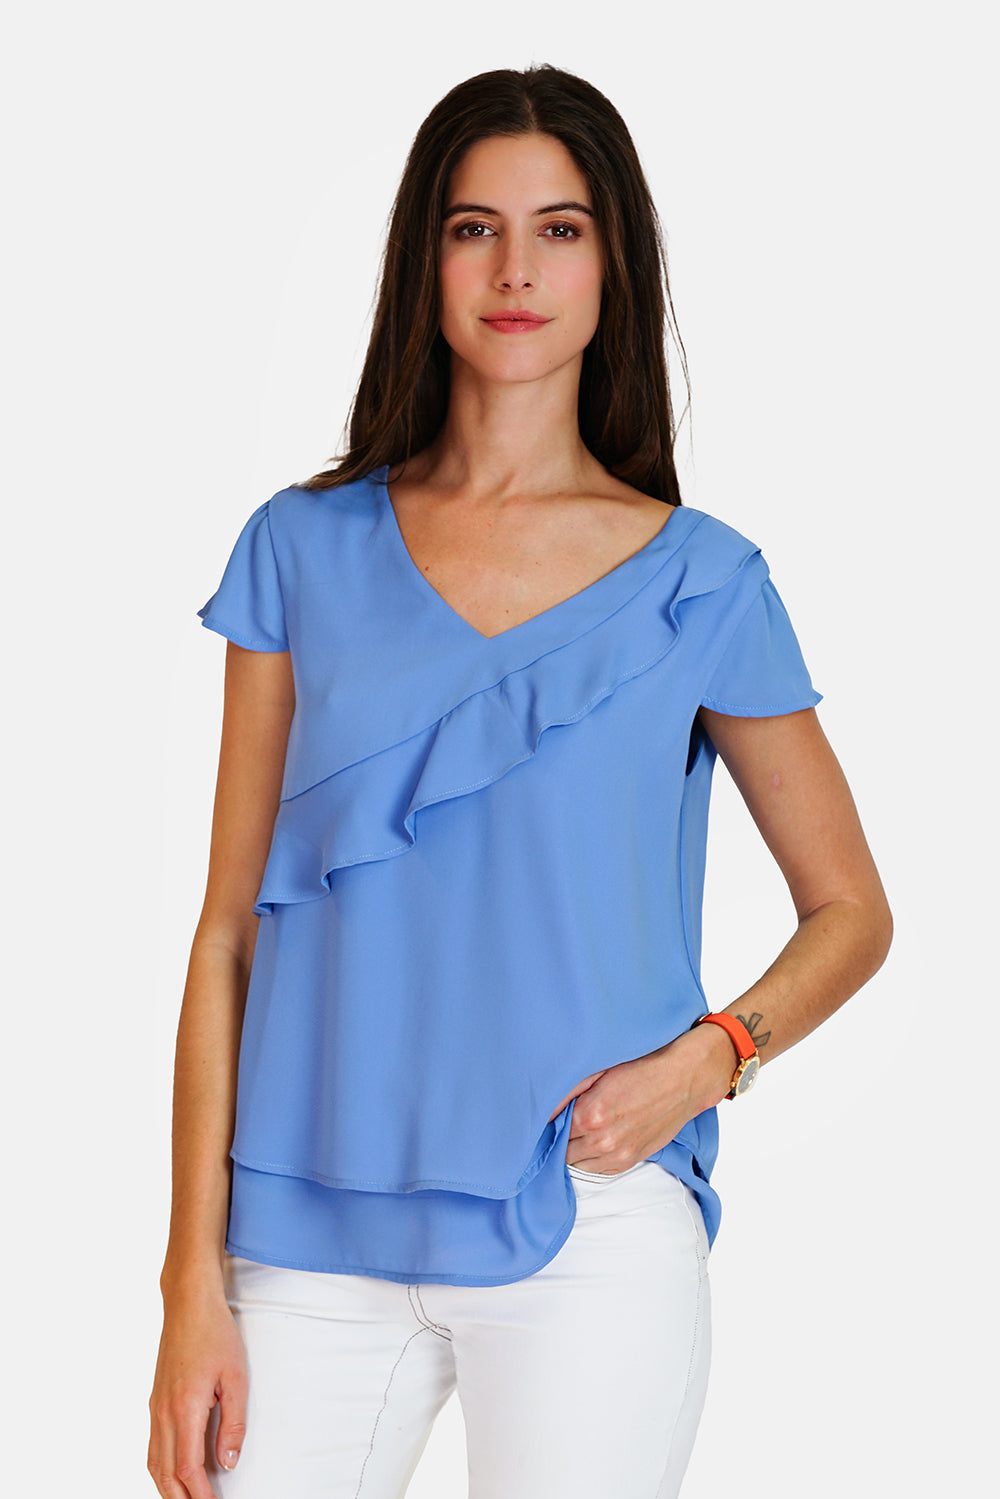 Top with V neckline in front and back with ruffles in front